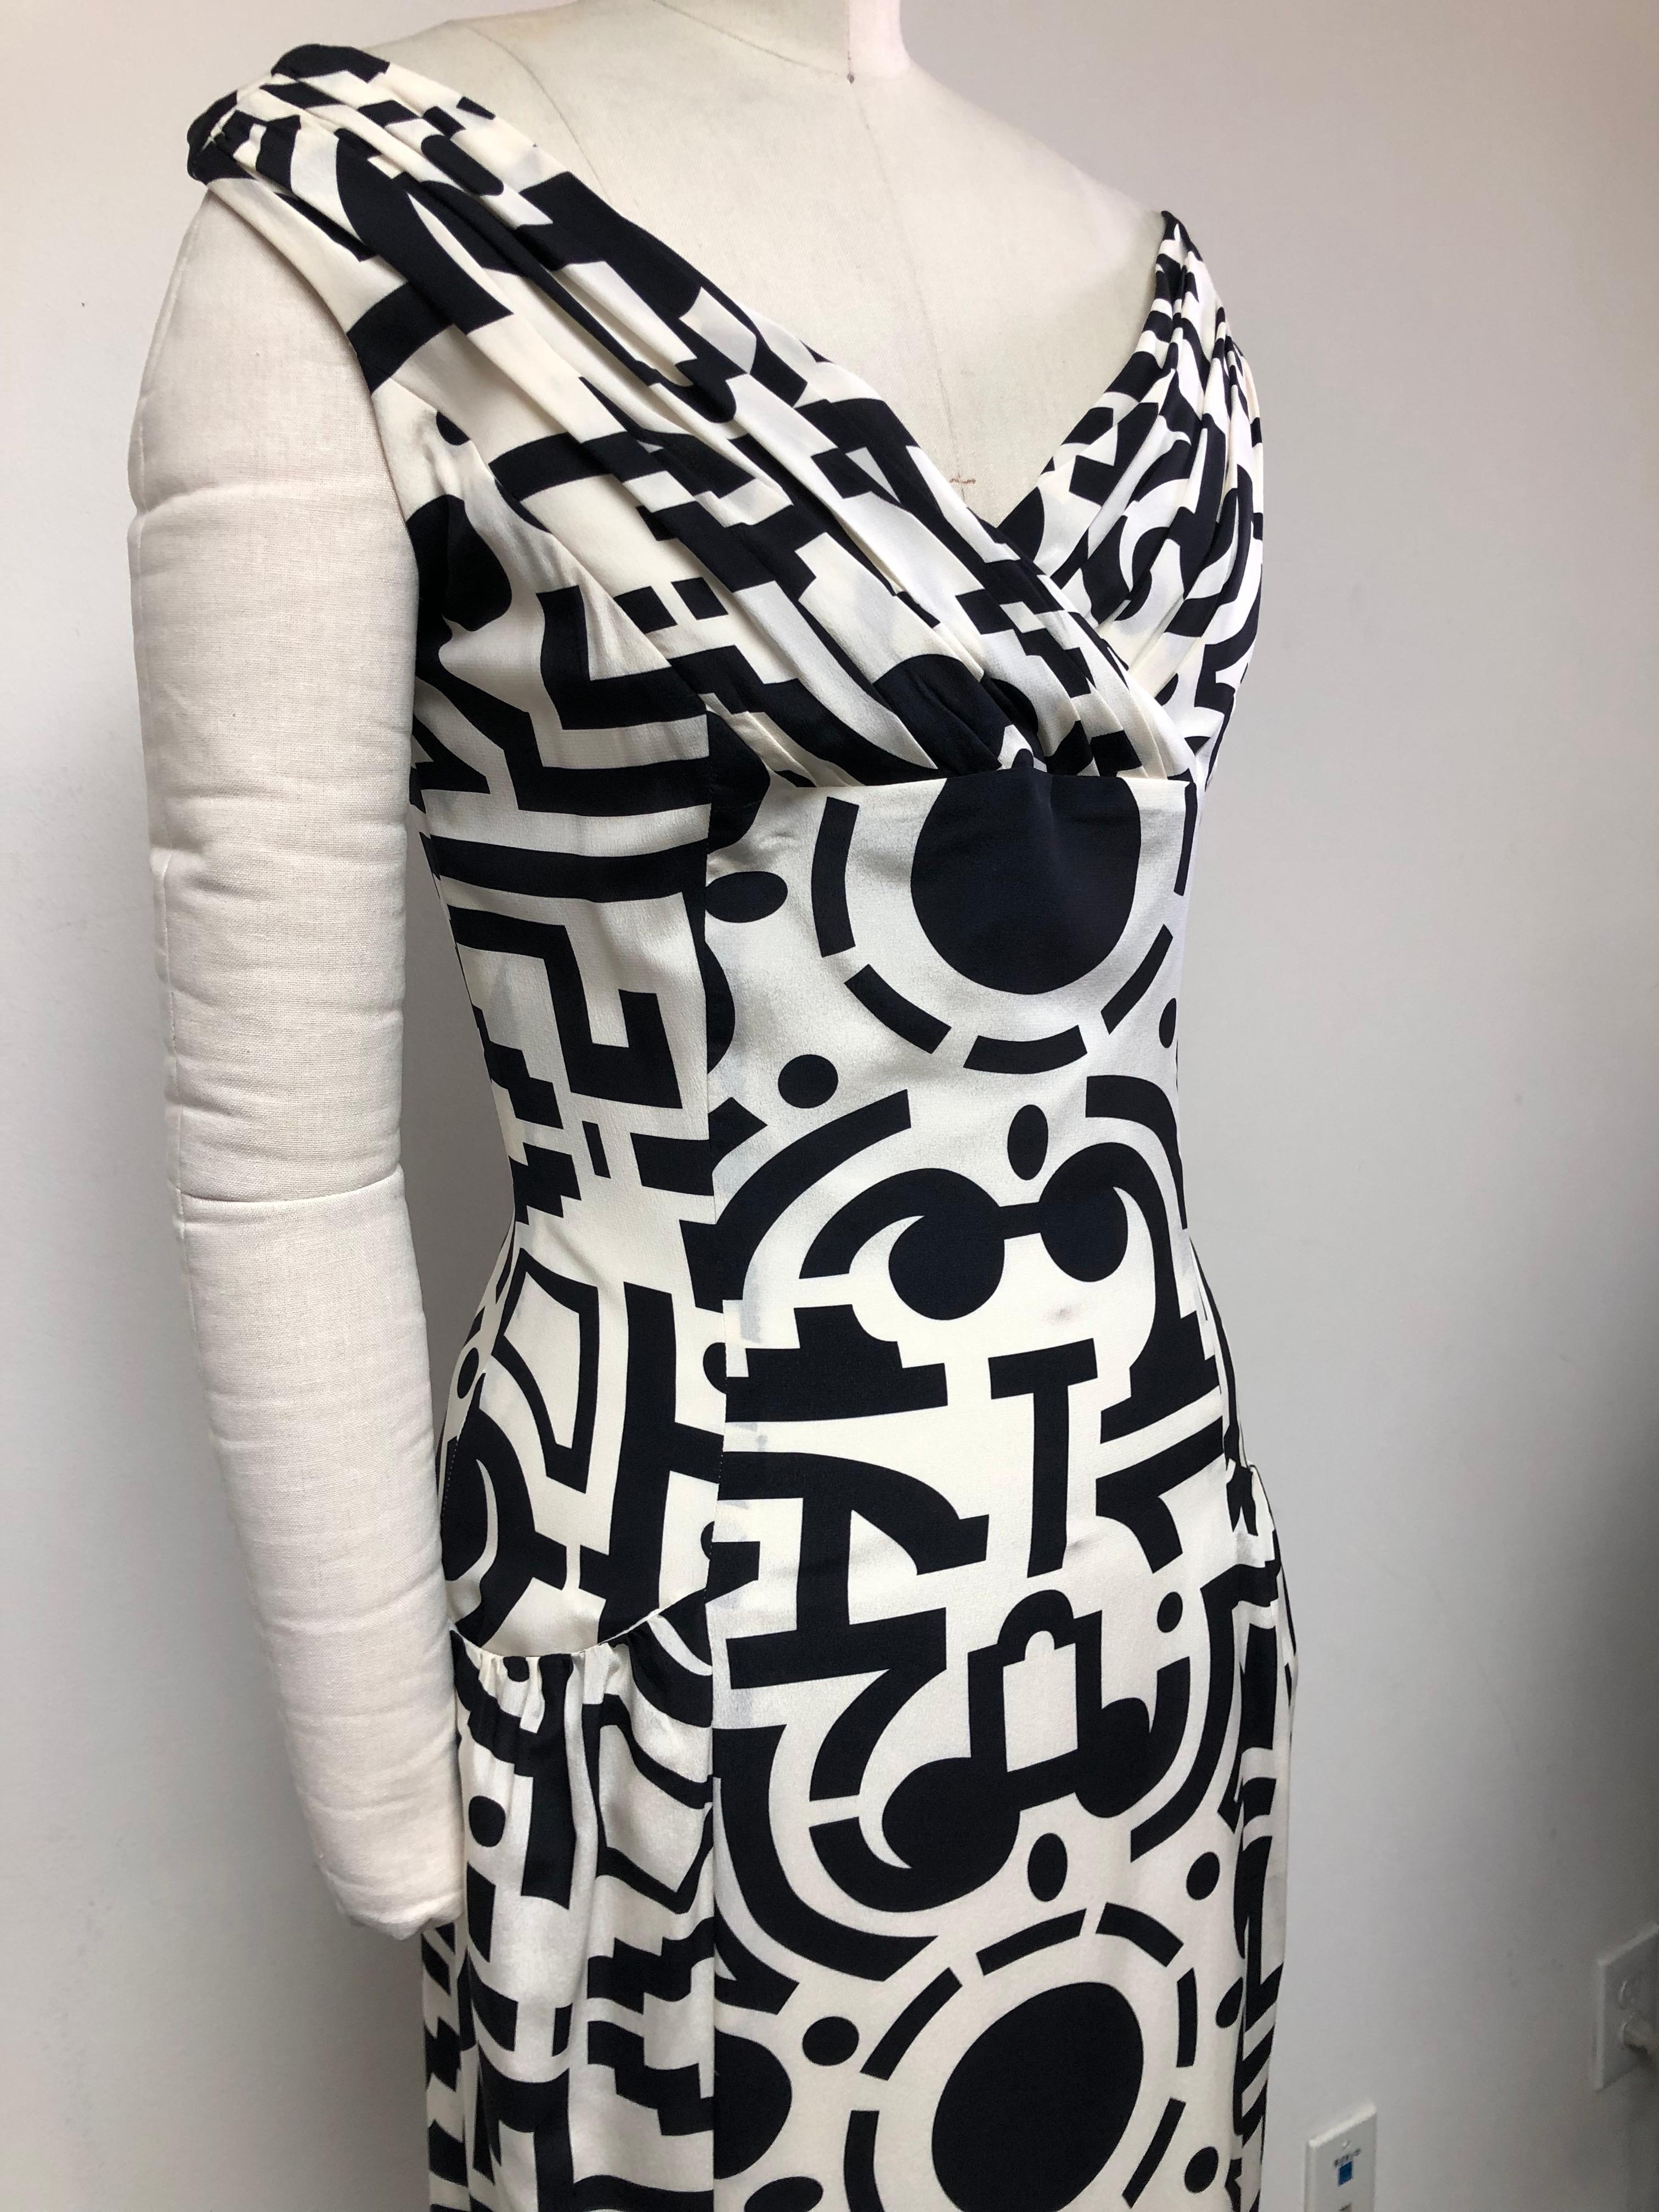 Black and White Topiary Garden Plan makes for a charming party dress. Gathered V neck off the shoulder bodice and side pockets.
Perfect for a garden party or black tie.
Crepe de chine 100% Silk from Frontline Zurich
maker of Hermes scarfs. A